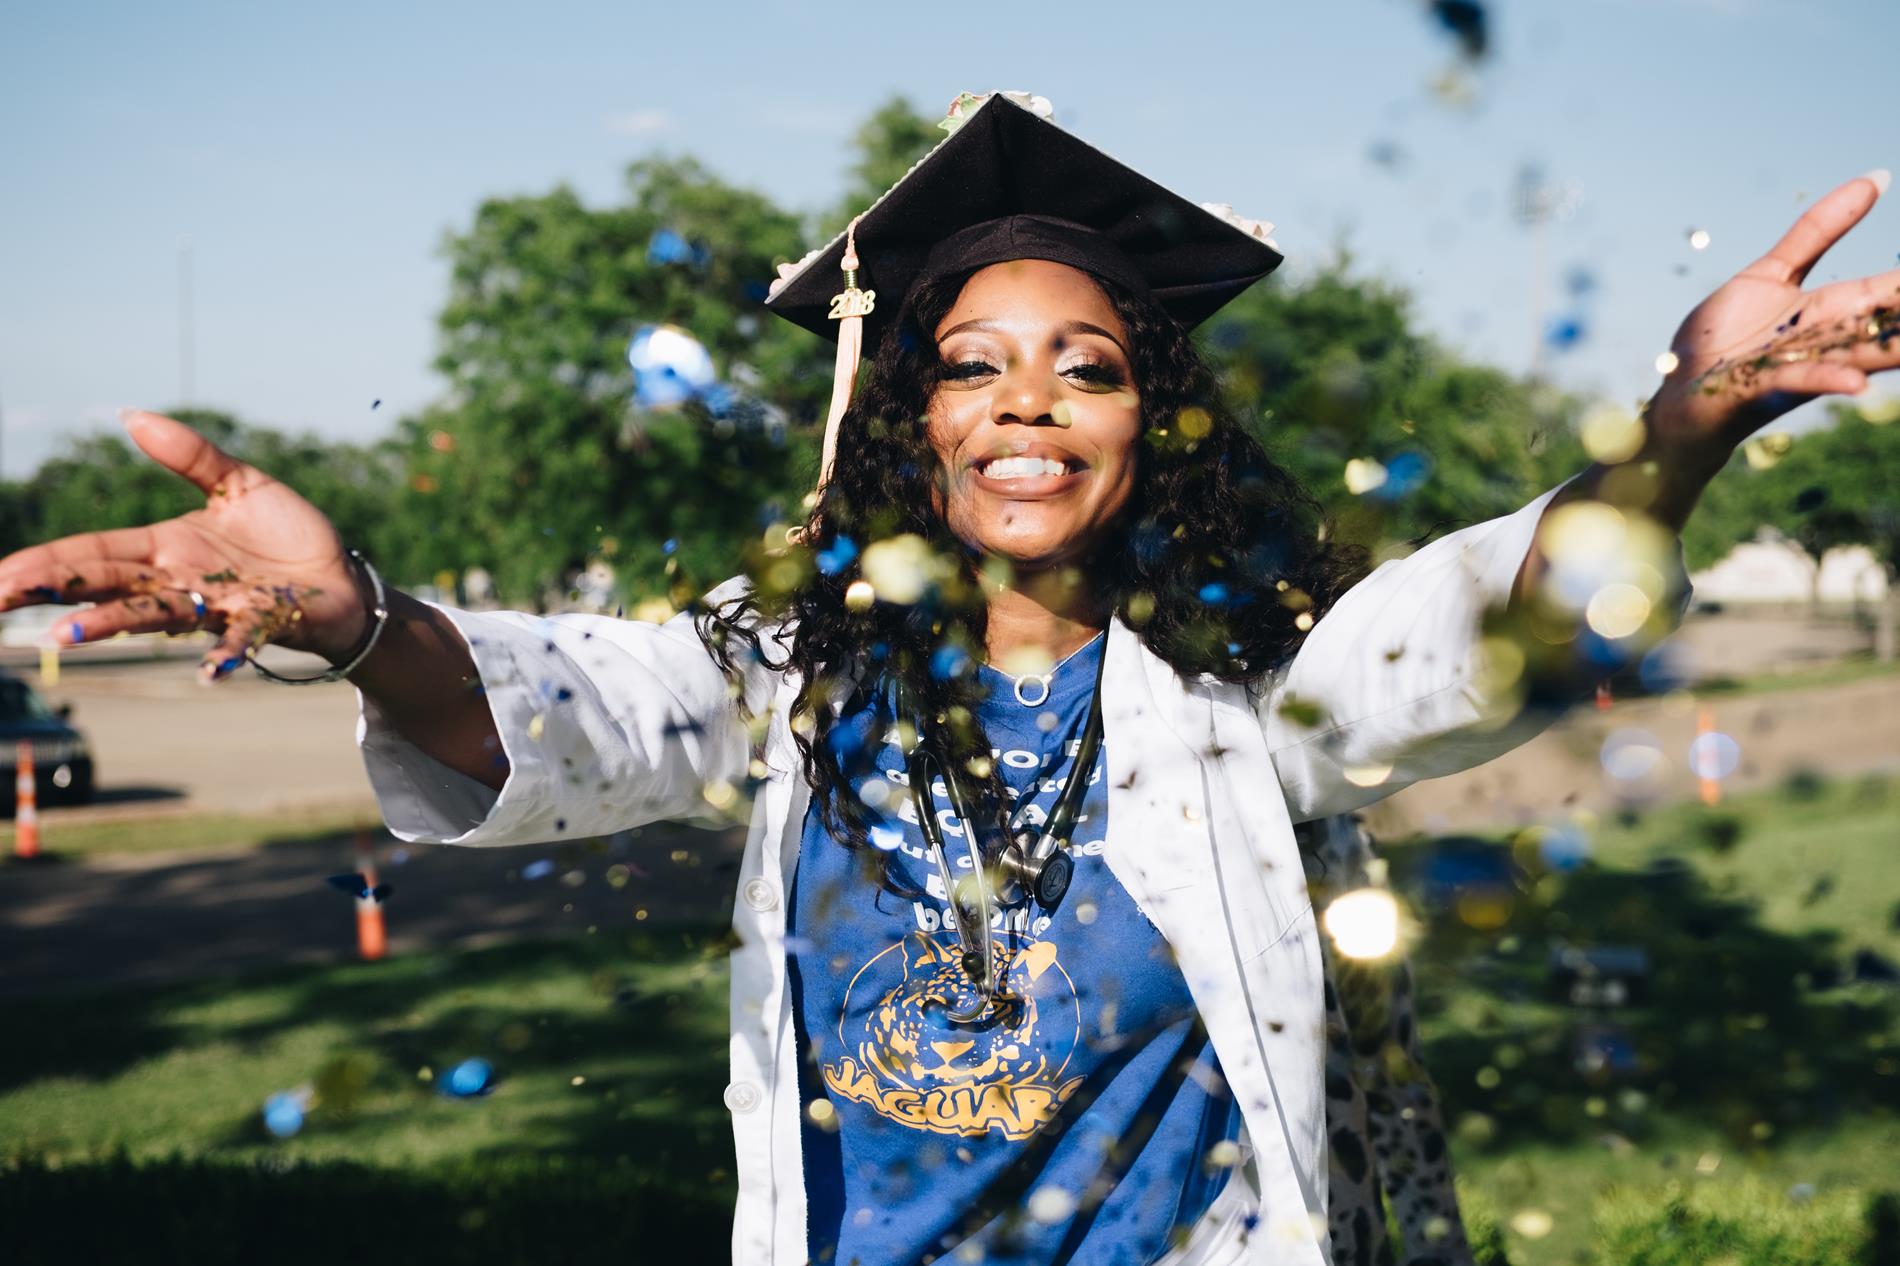 a young woman throws confetti while wearing a black graduation robe and cap